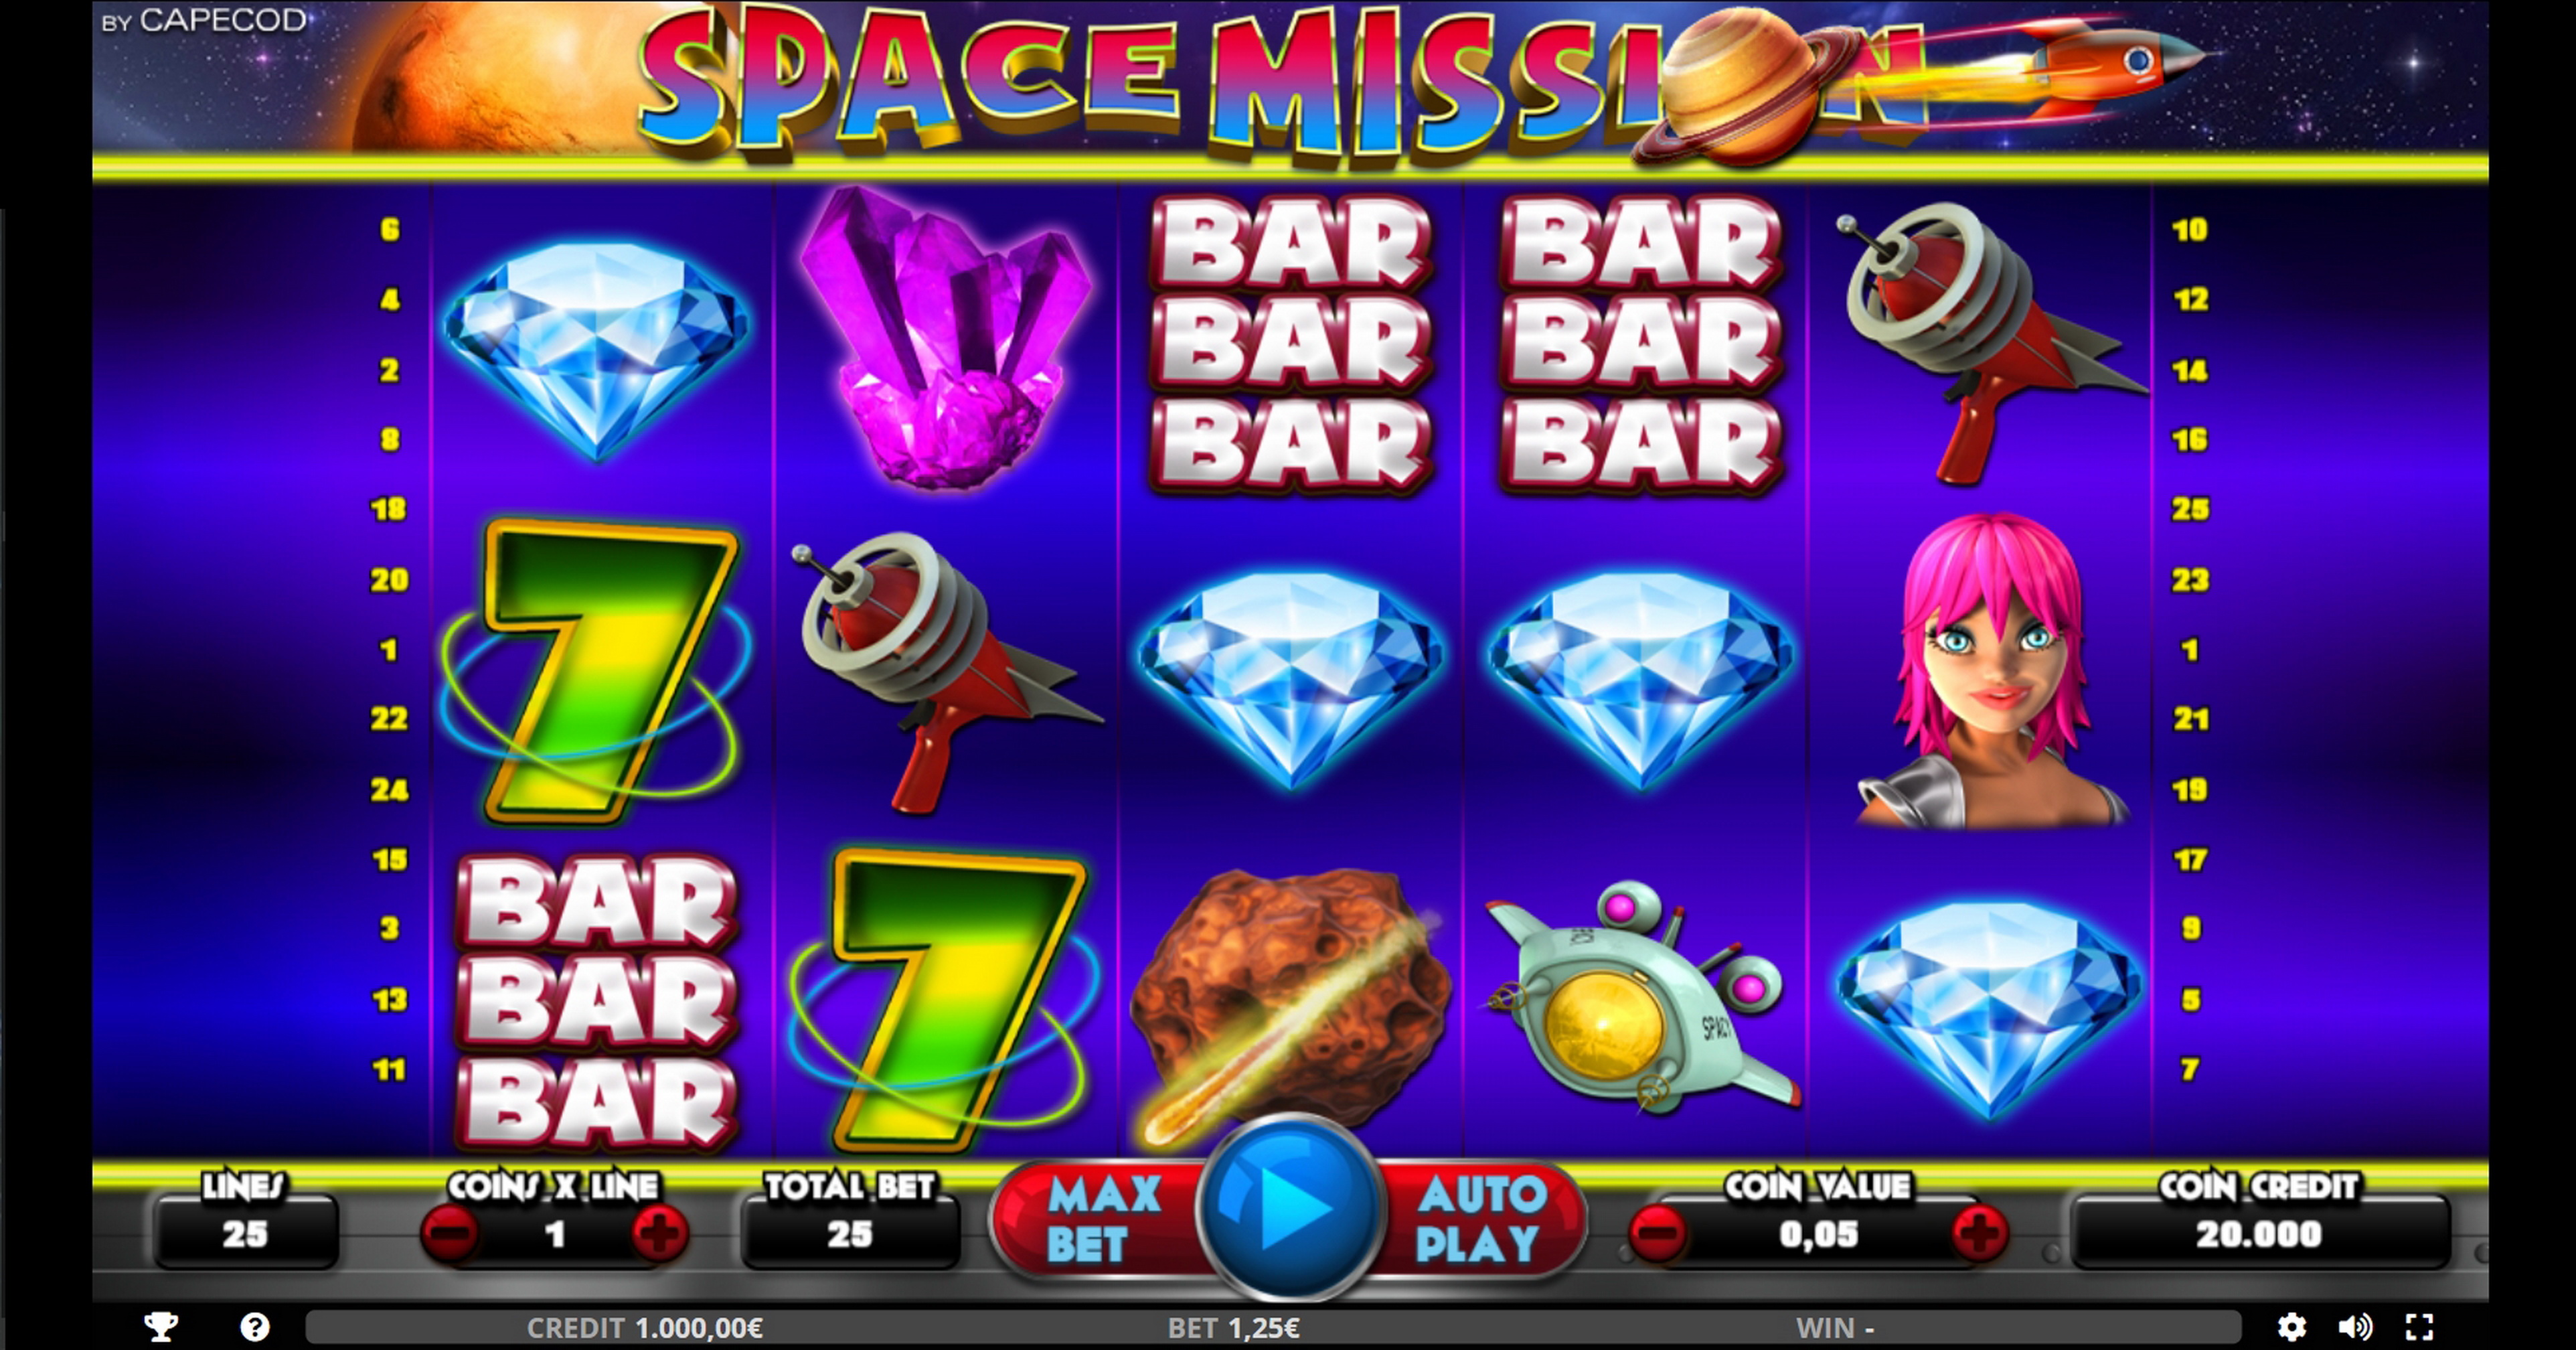 Reels in Space Mission Slot Game by Capecod Gaming